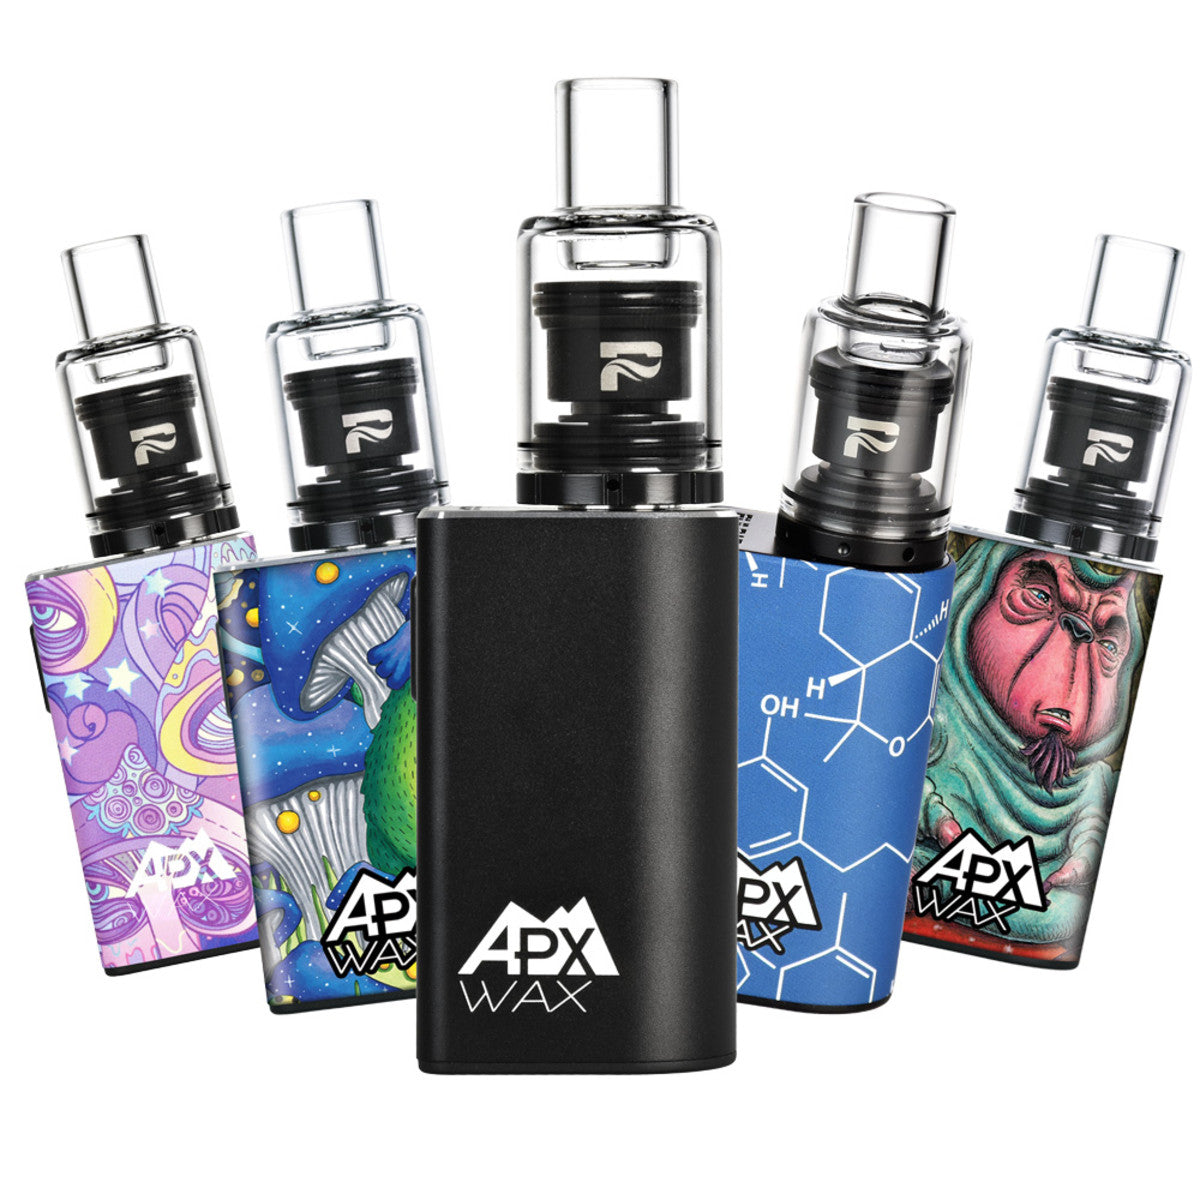 pulsar apx wax v3 concentrate vaporizer colors